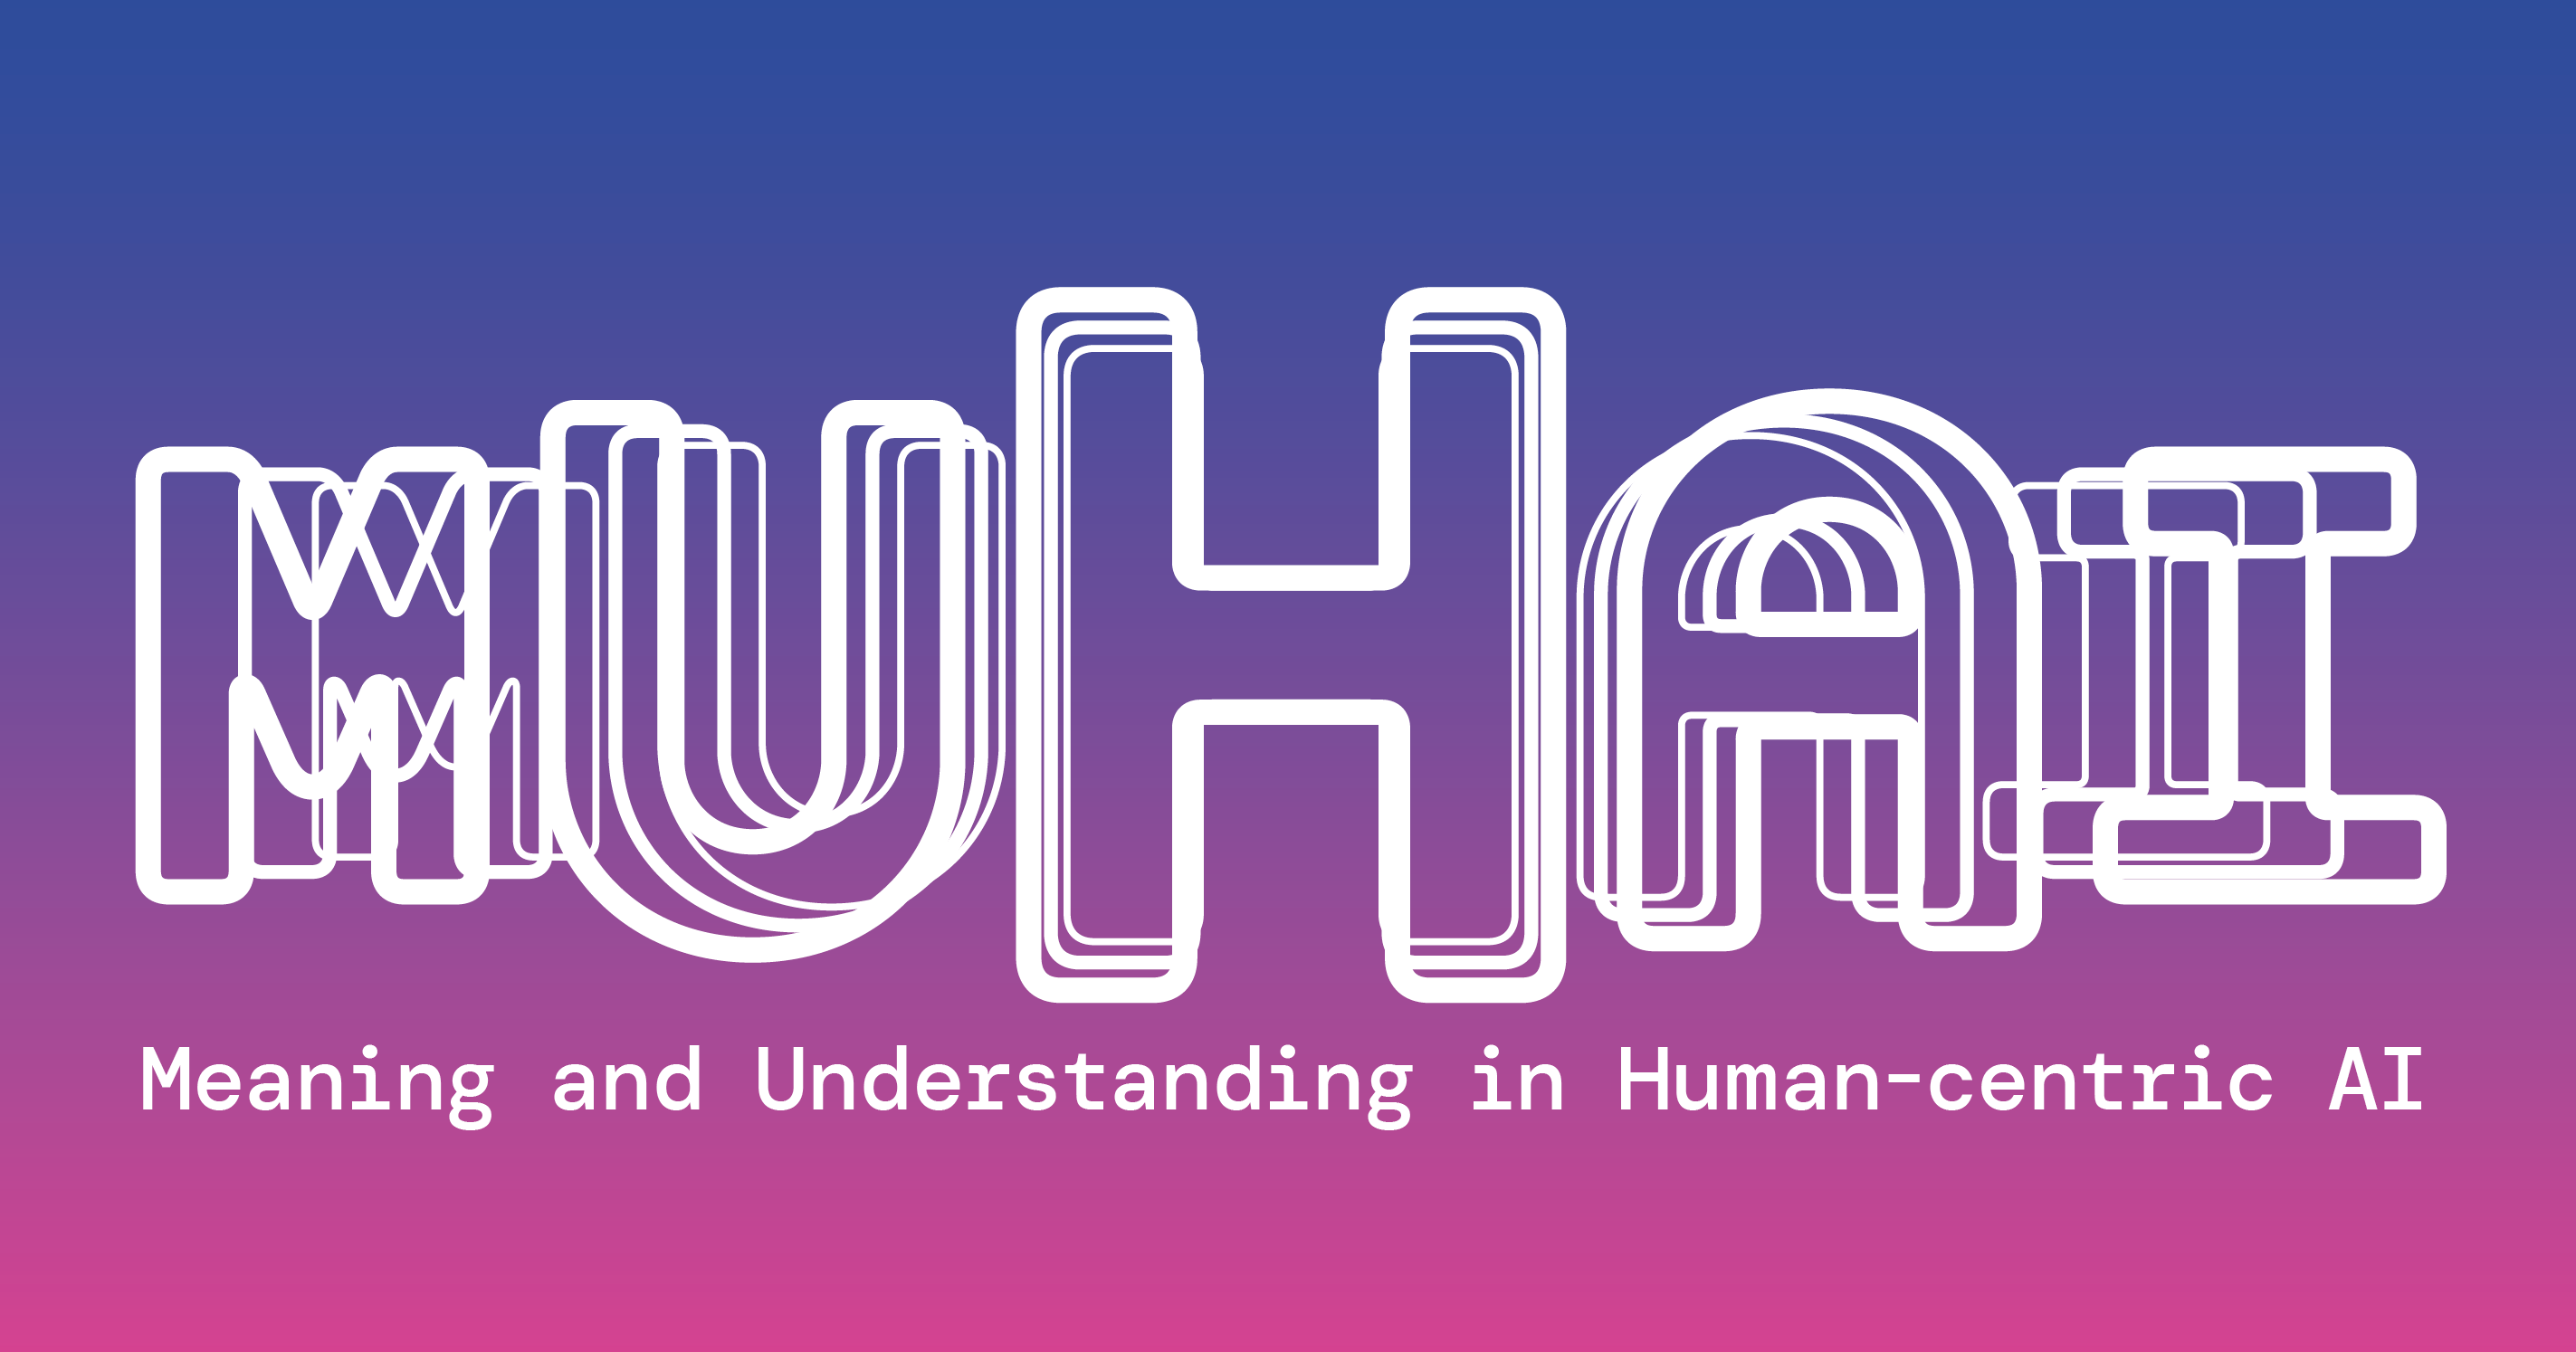 Muhai - Meaning and understaing in Human-centric AI